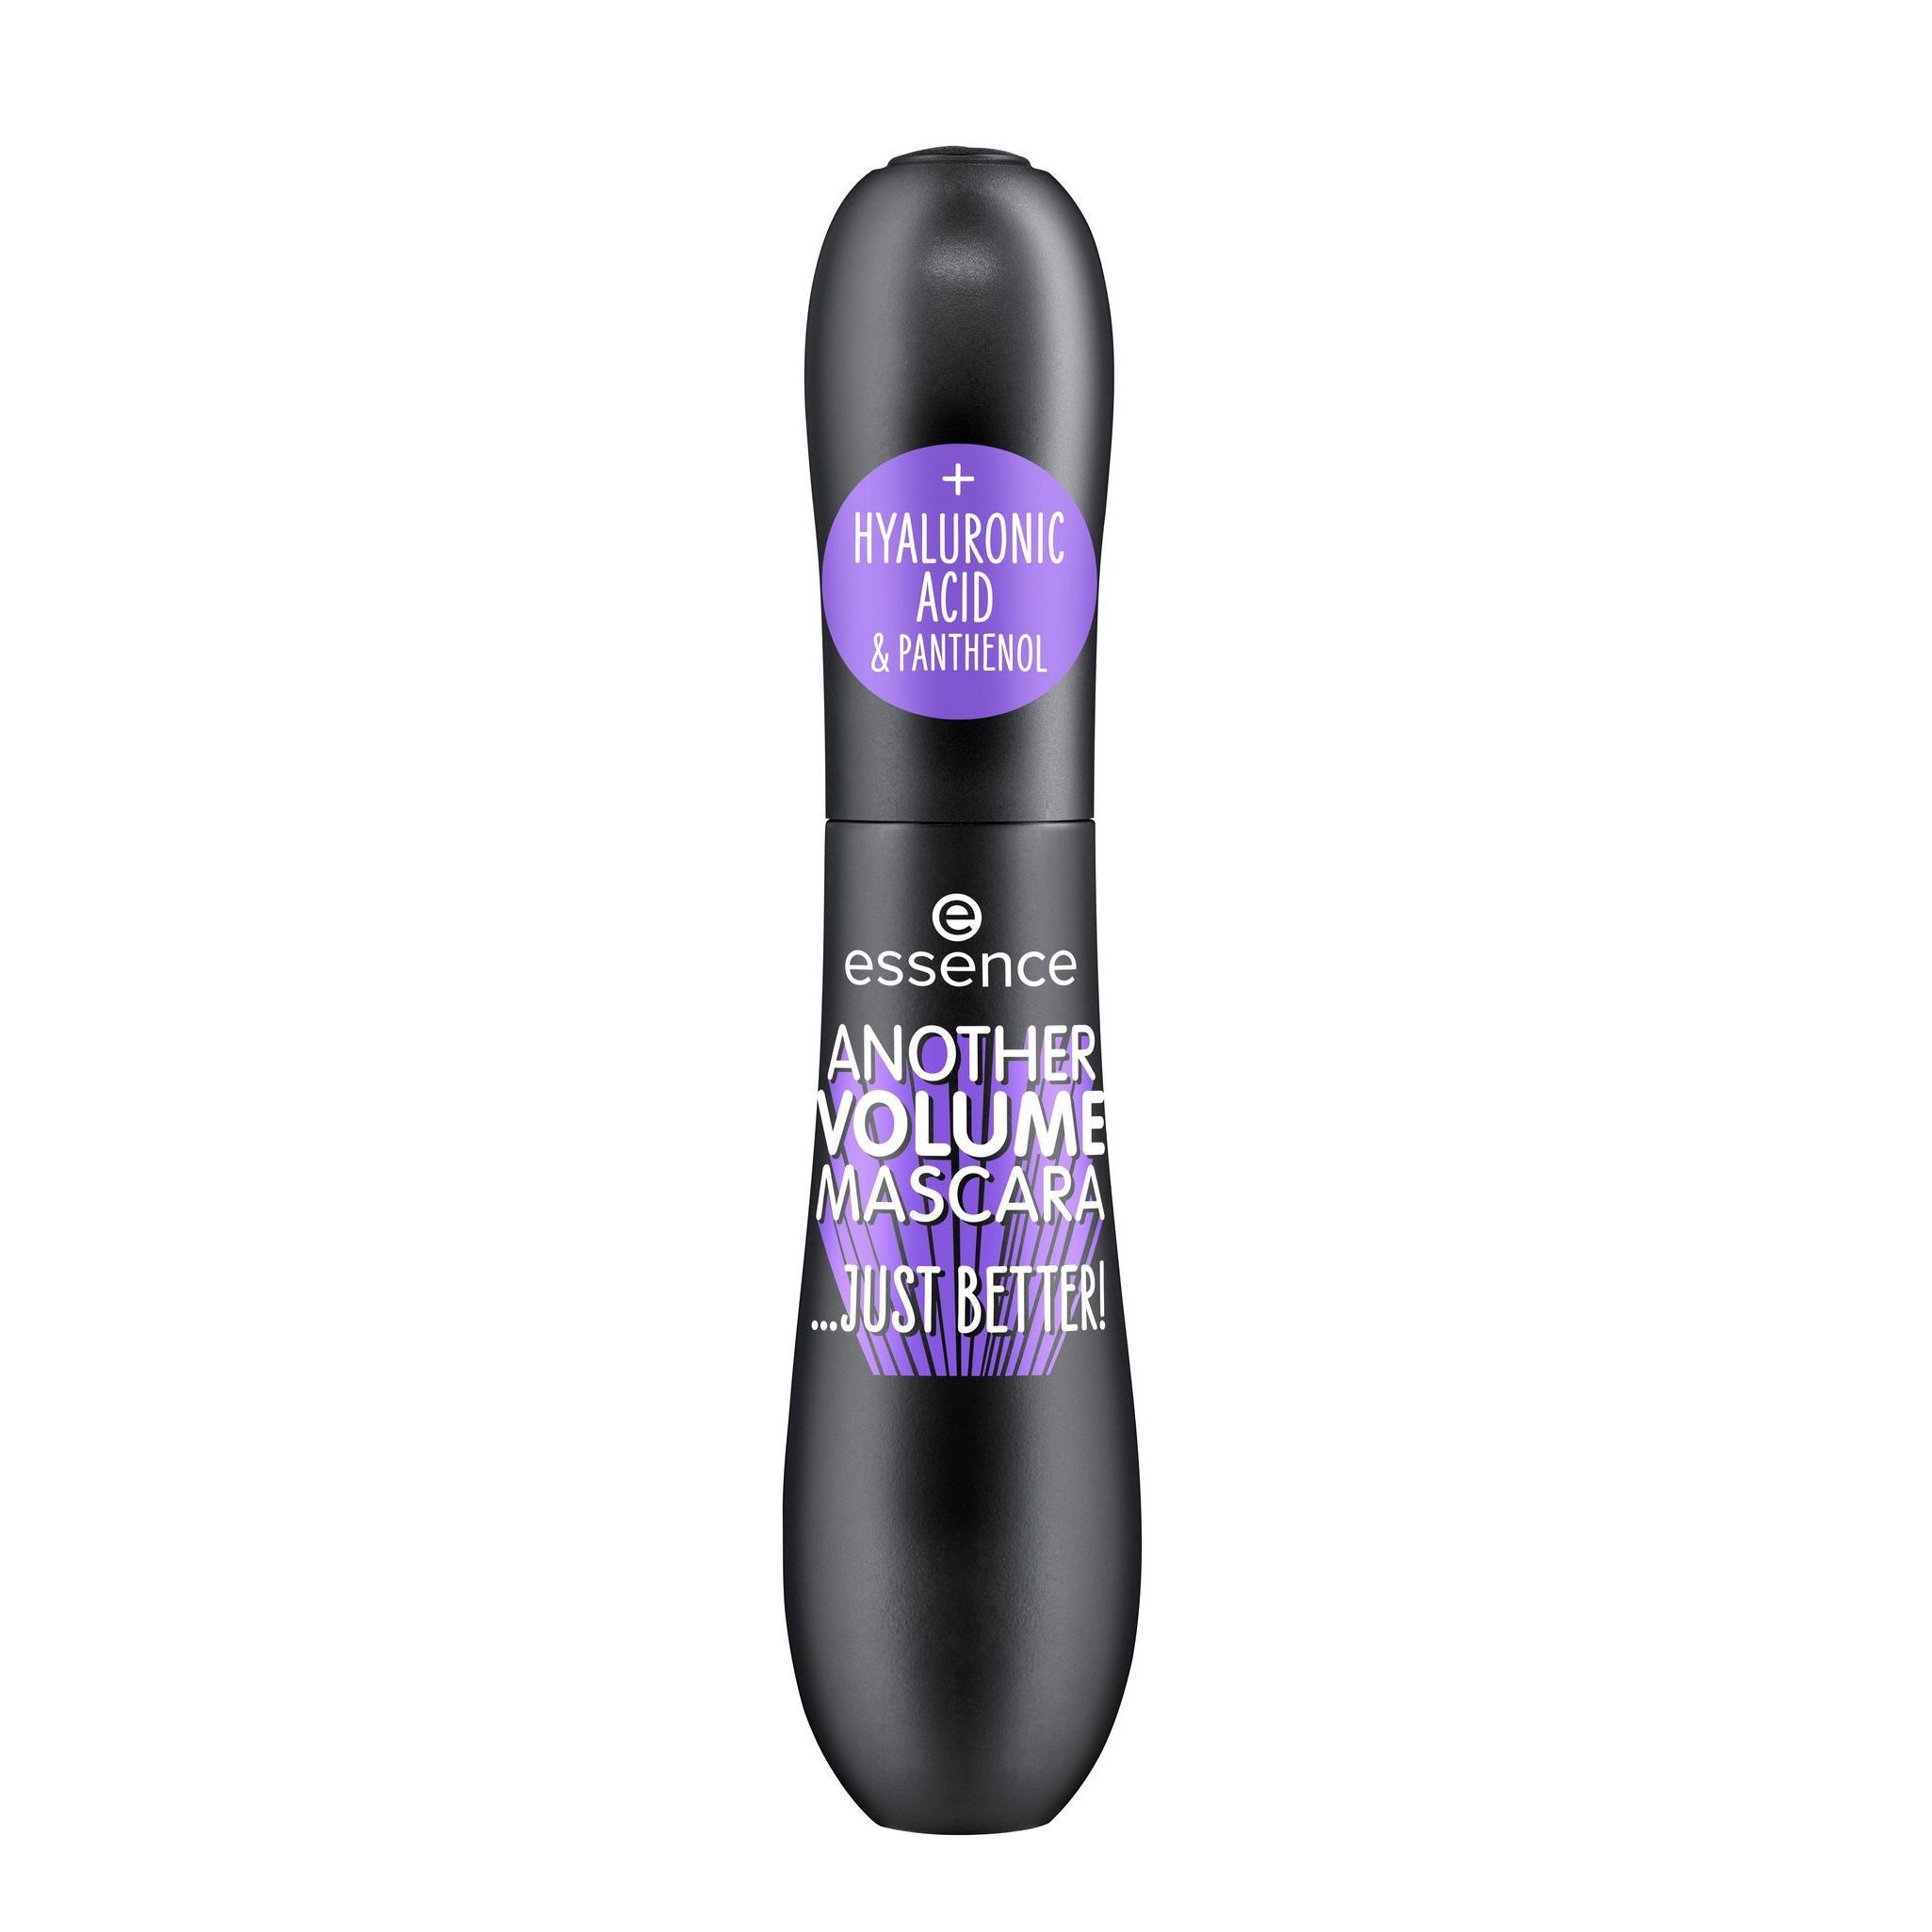 Another Volume Mascara ... Just Better